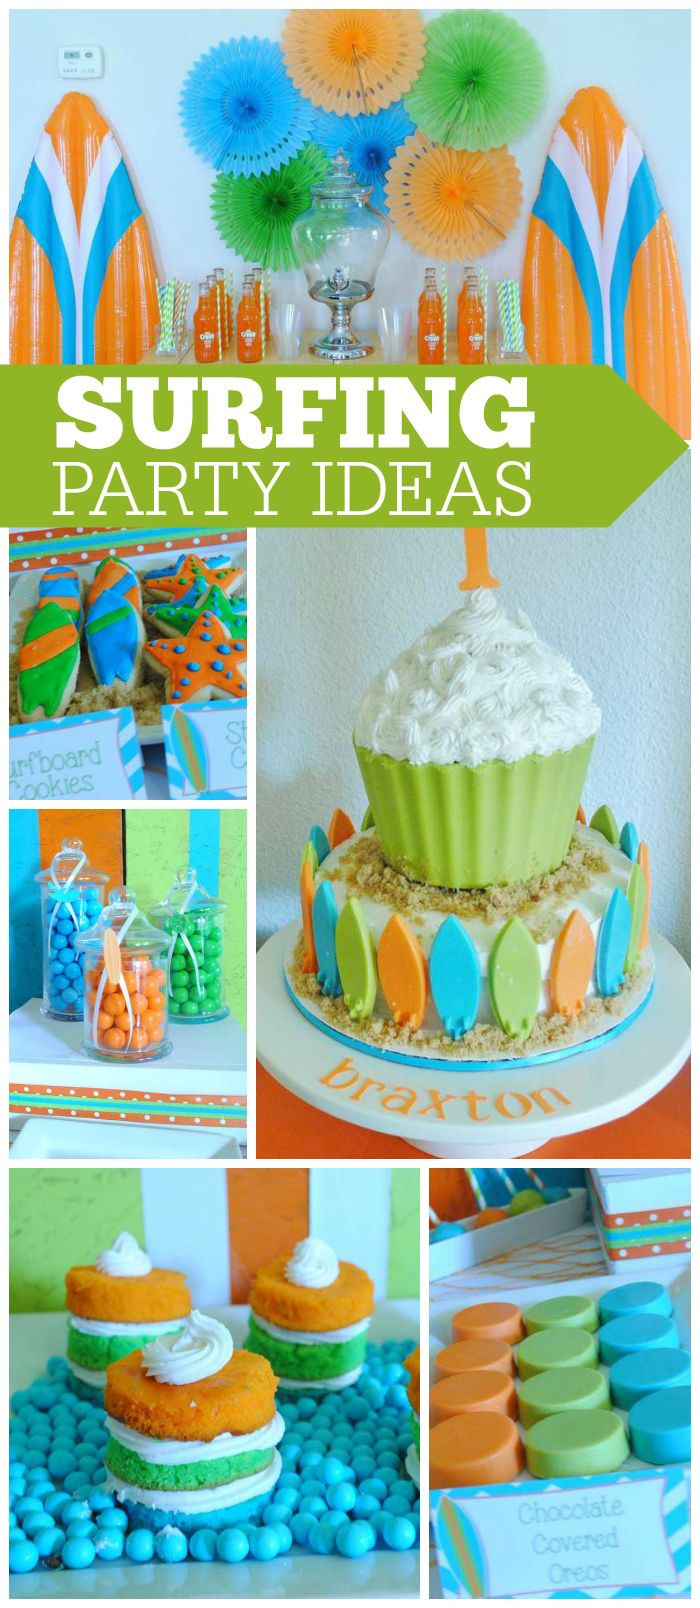 Boy Beach Birthday Party Ideas
 Love this beach themed surf party in green orange and